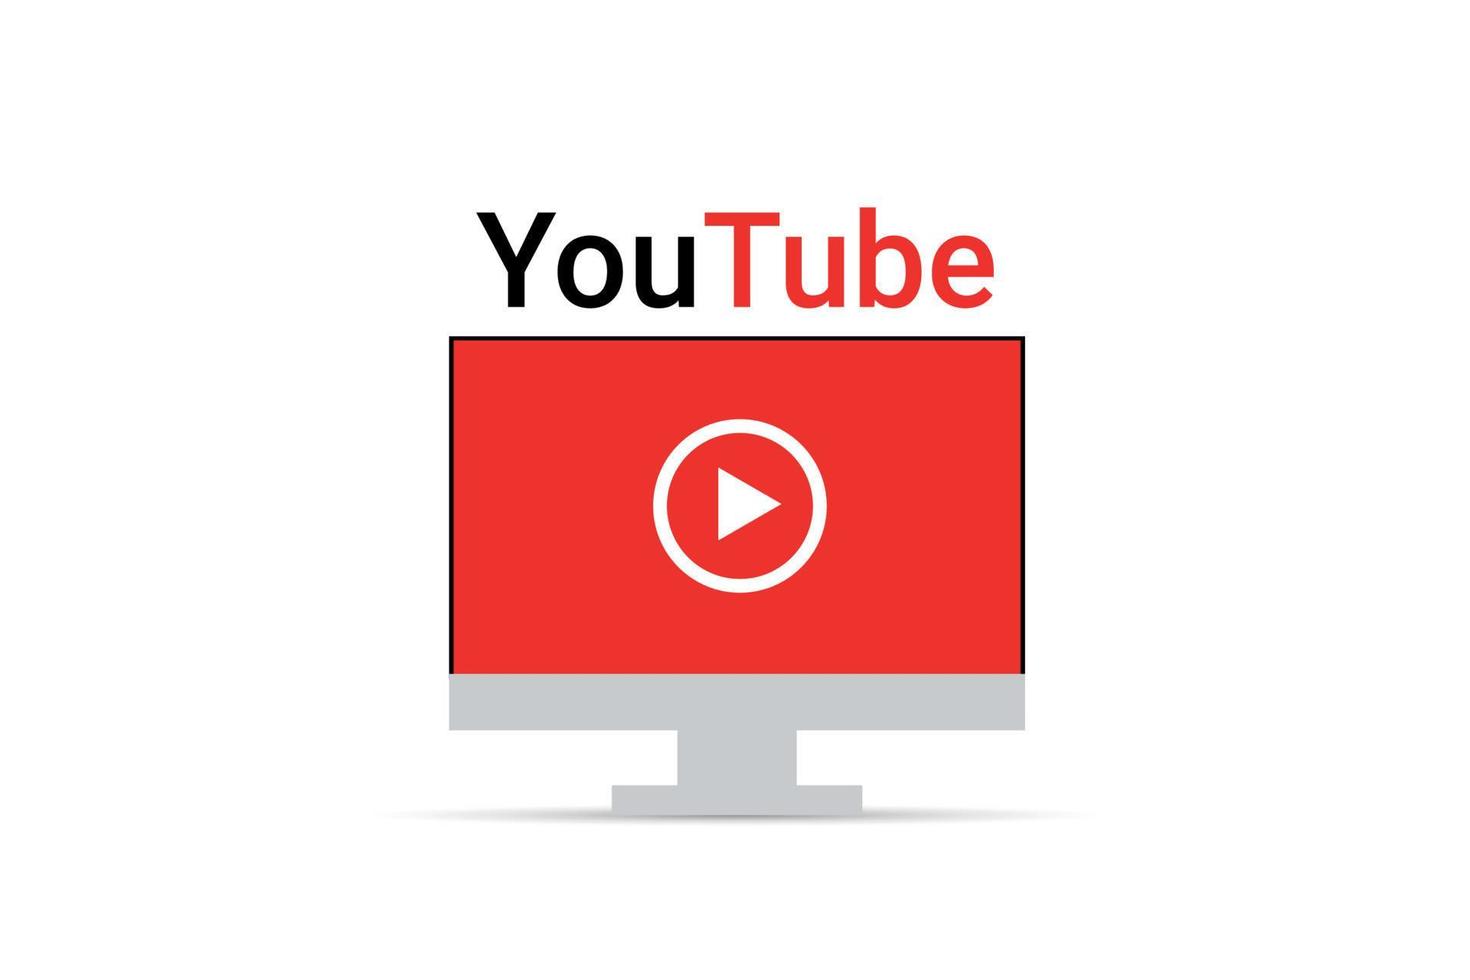 Youtube Video  player icon on computer screen concept vector